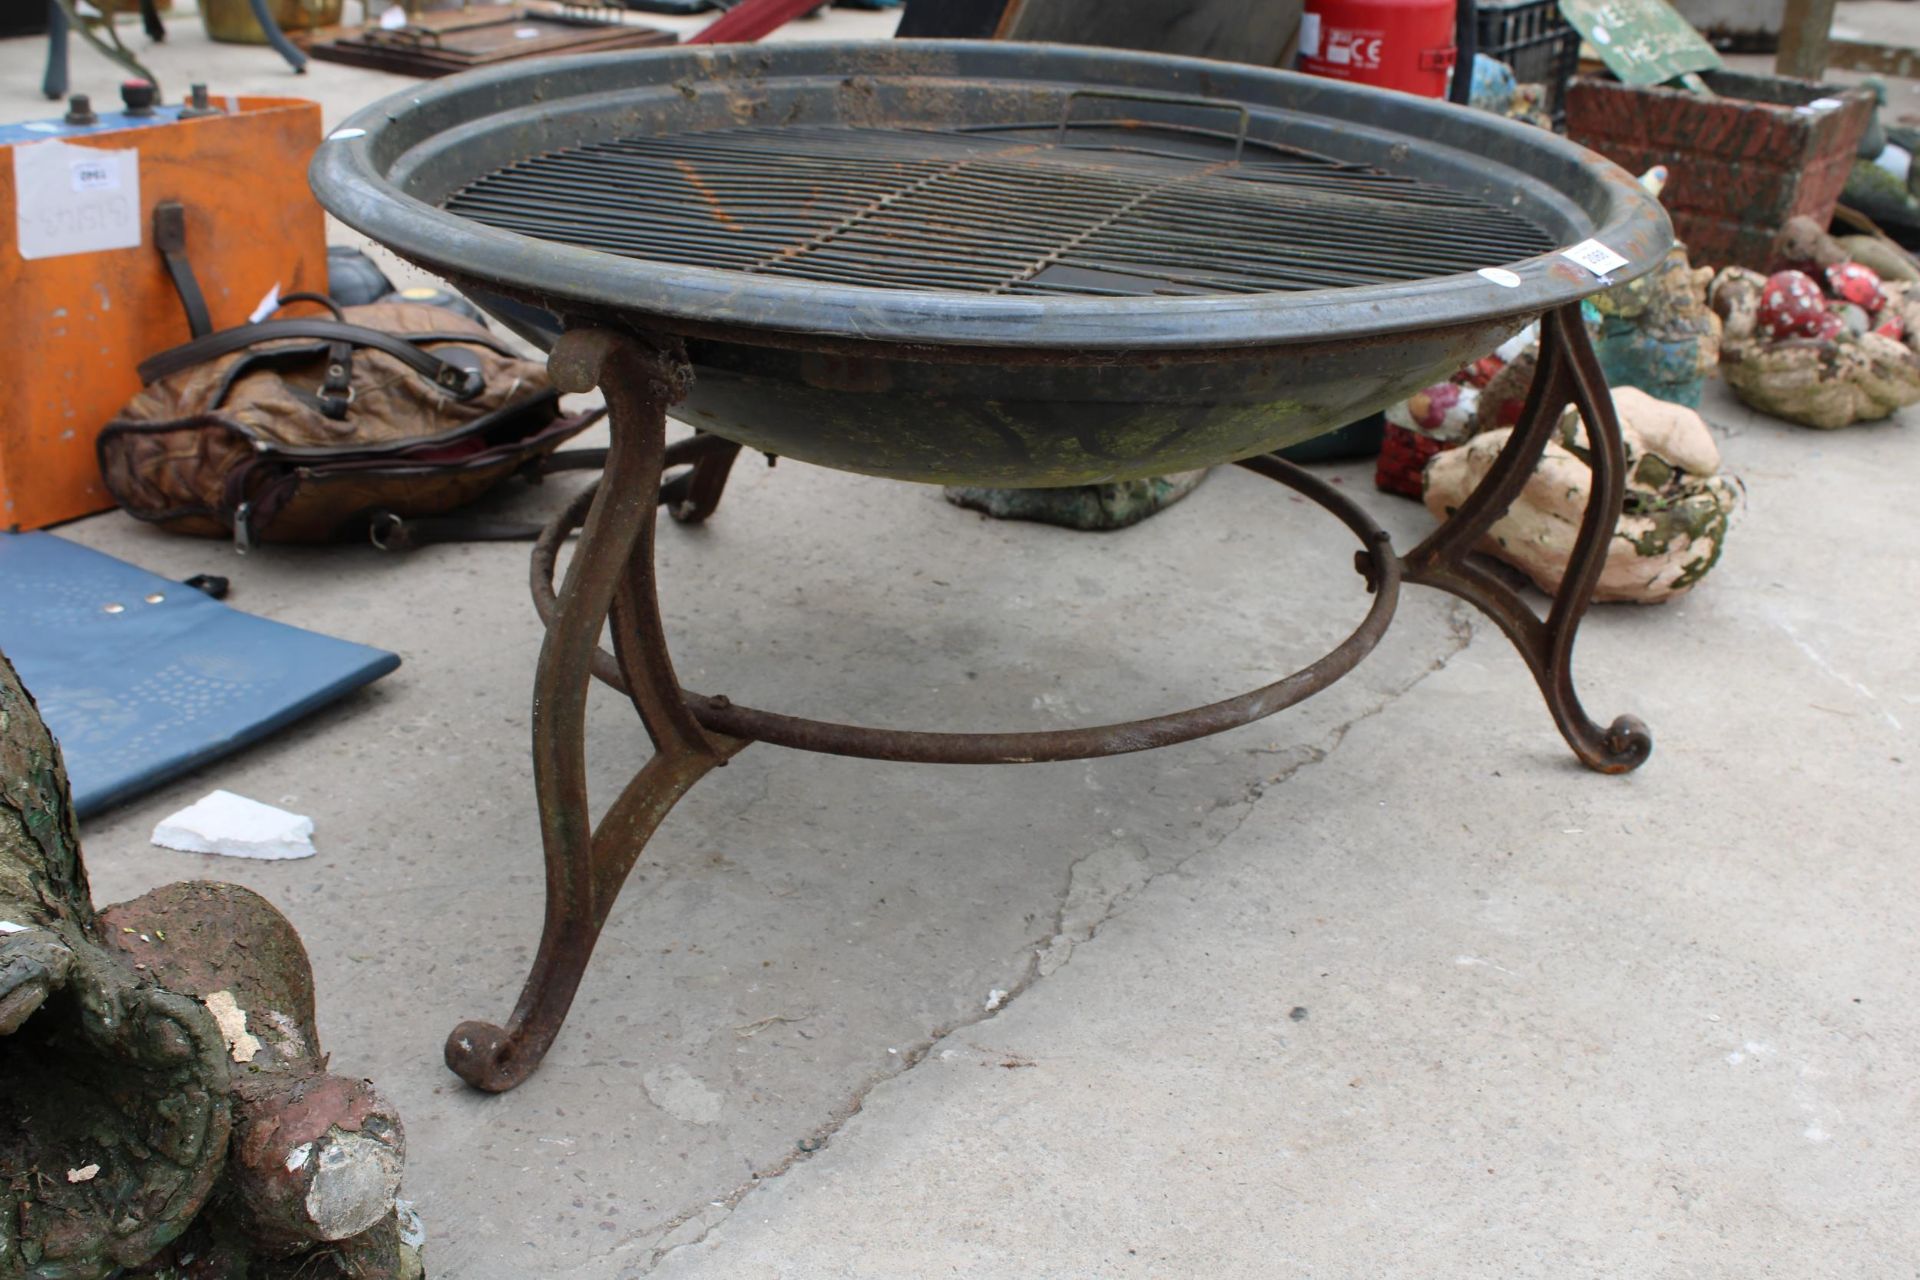 A CIRCUALR METAL FIRE PIT - Image 2 of 2